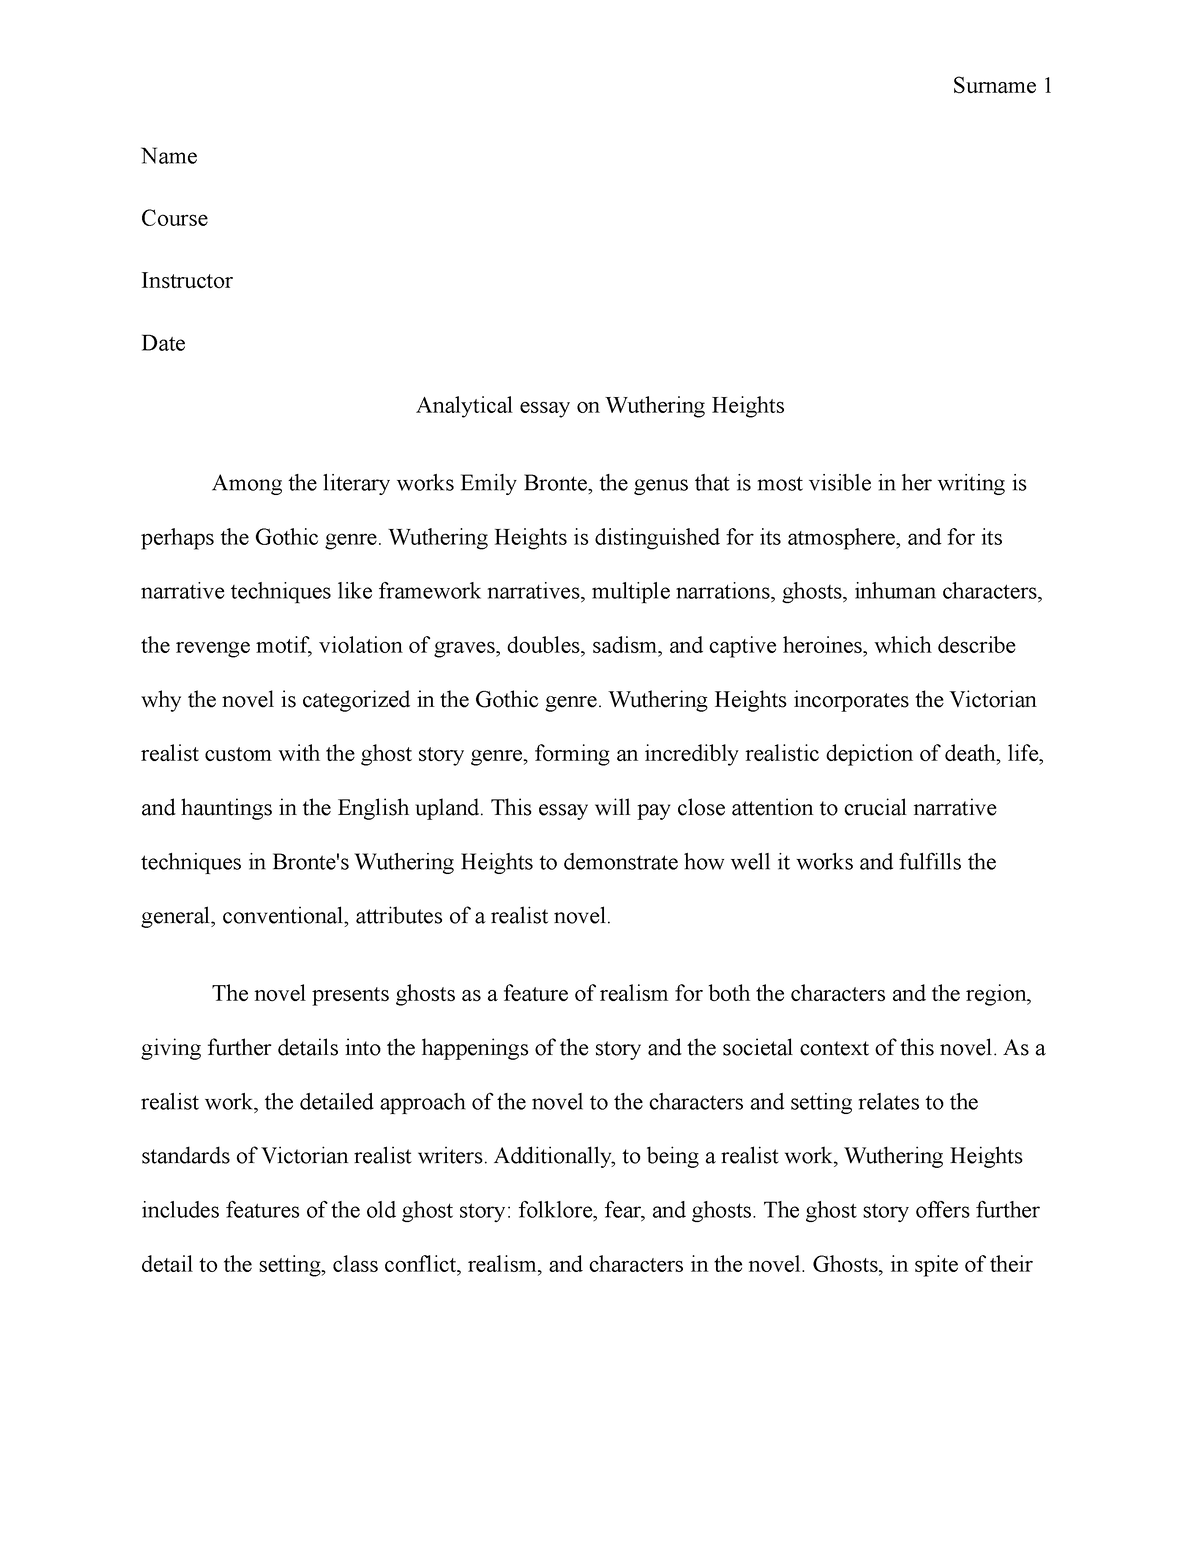 wuthering heights essay on social class